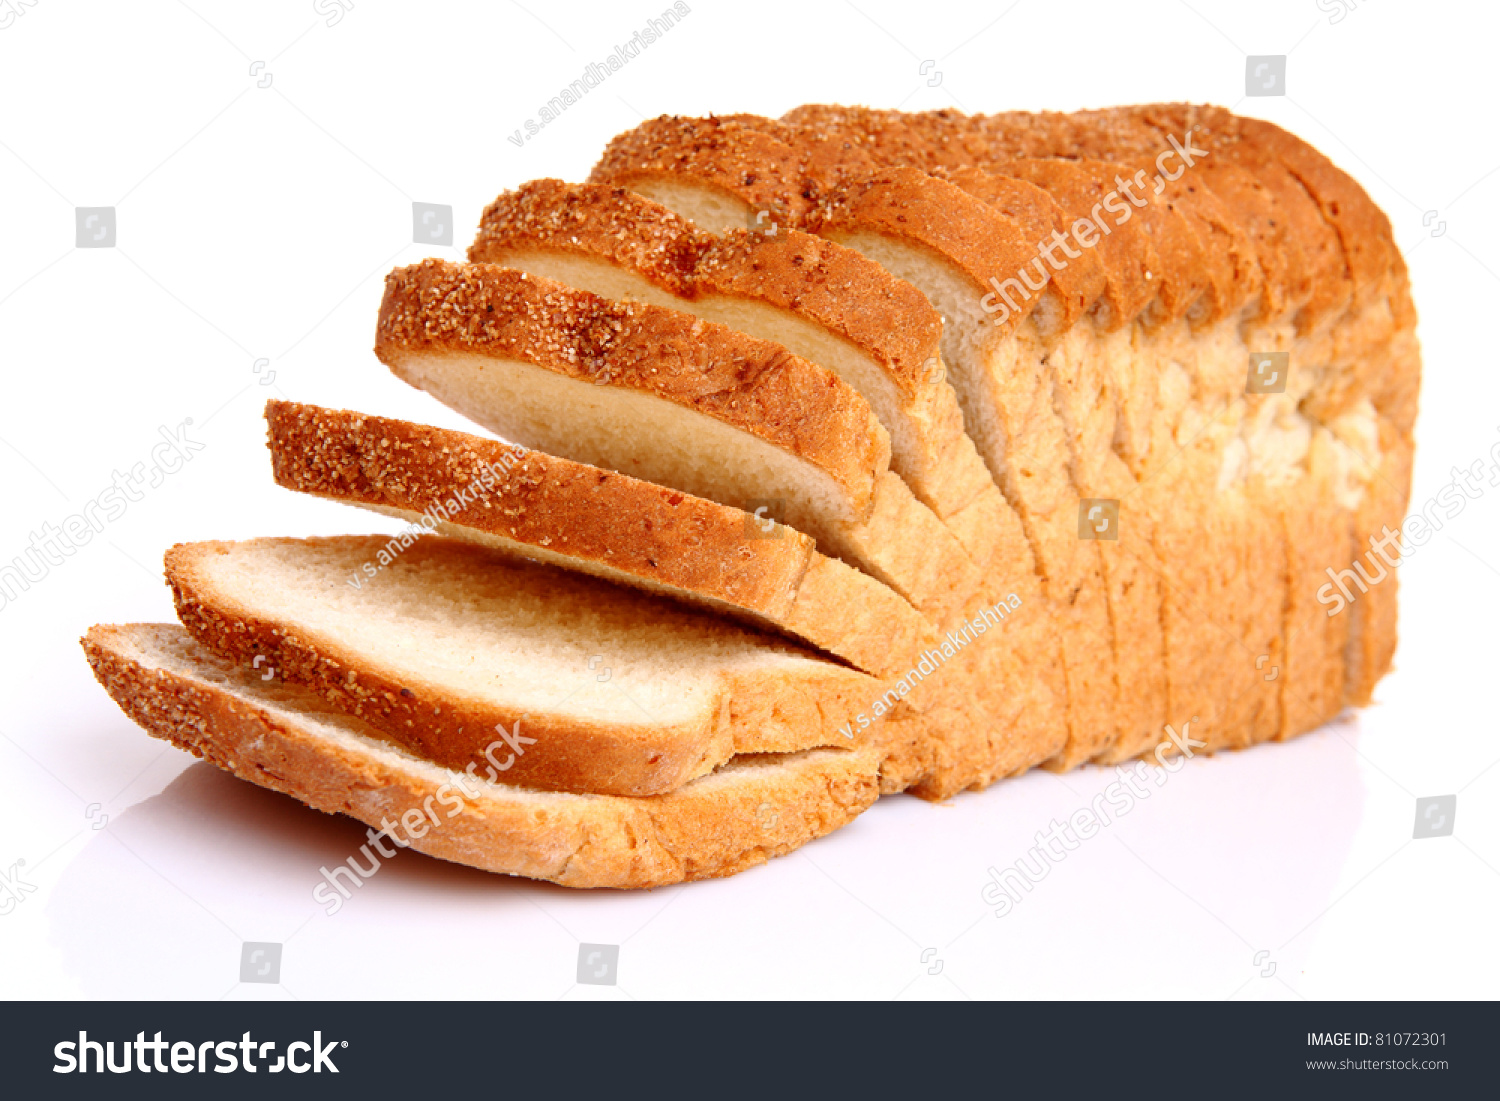 The cut loaf of bread with reflection isolated on white #81072301